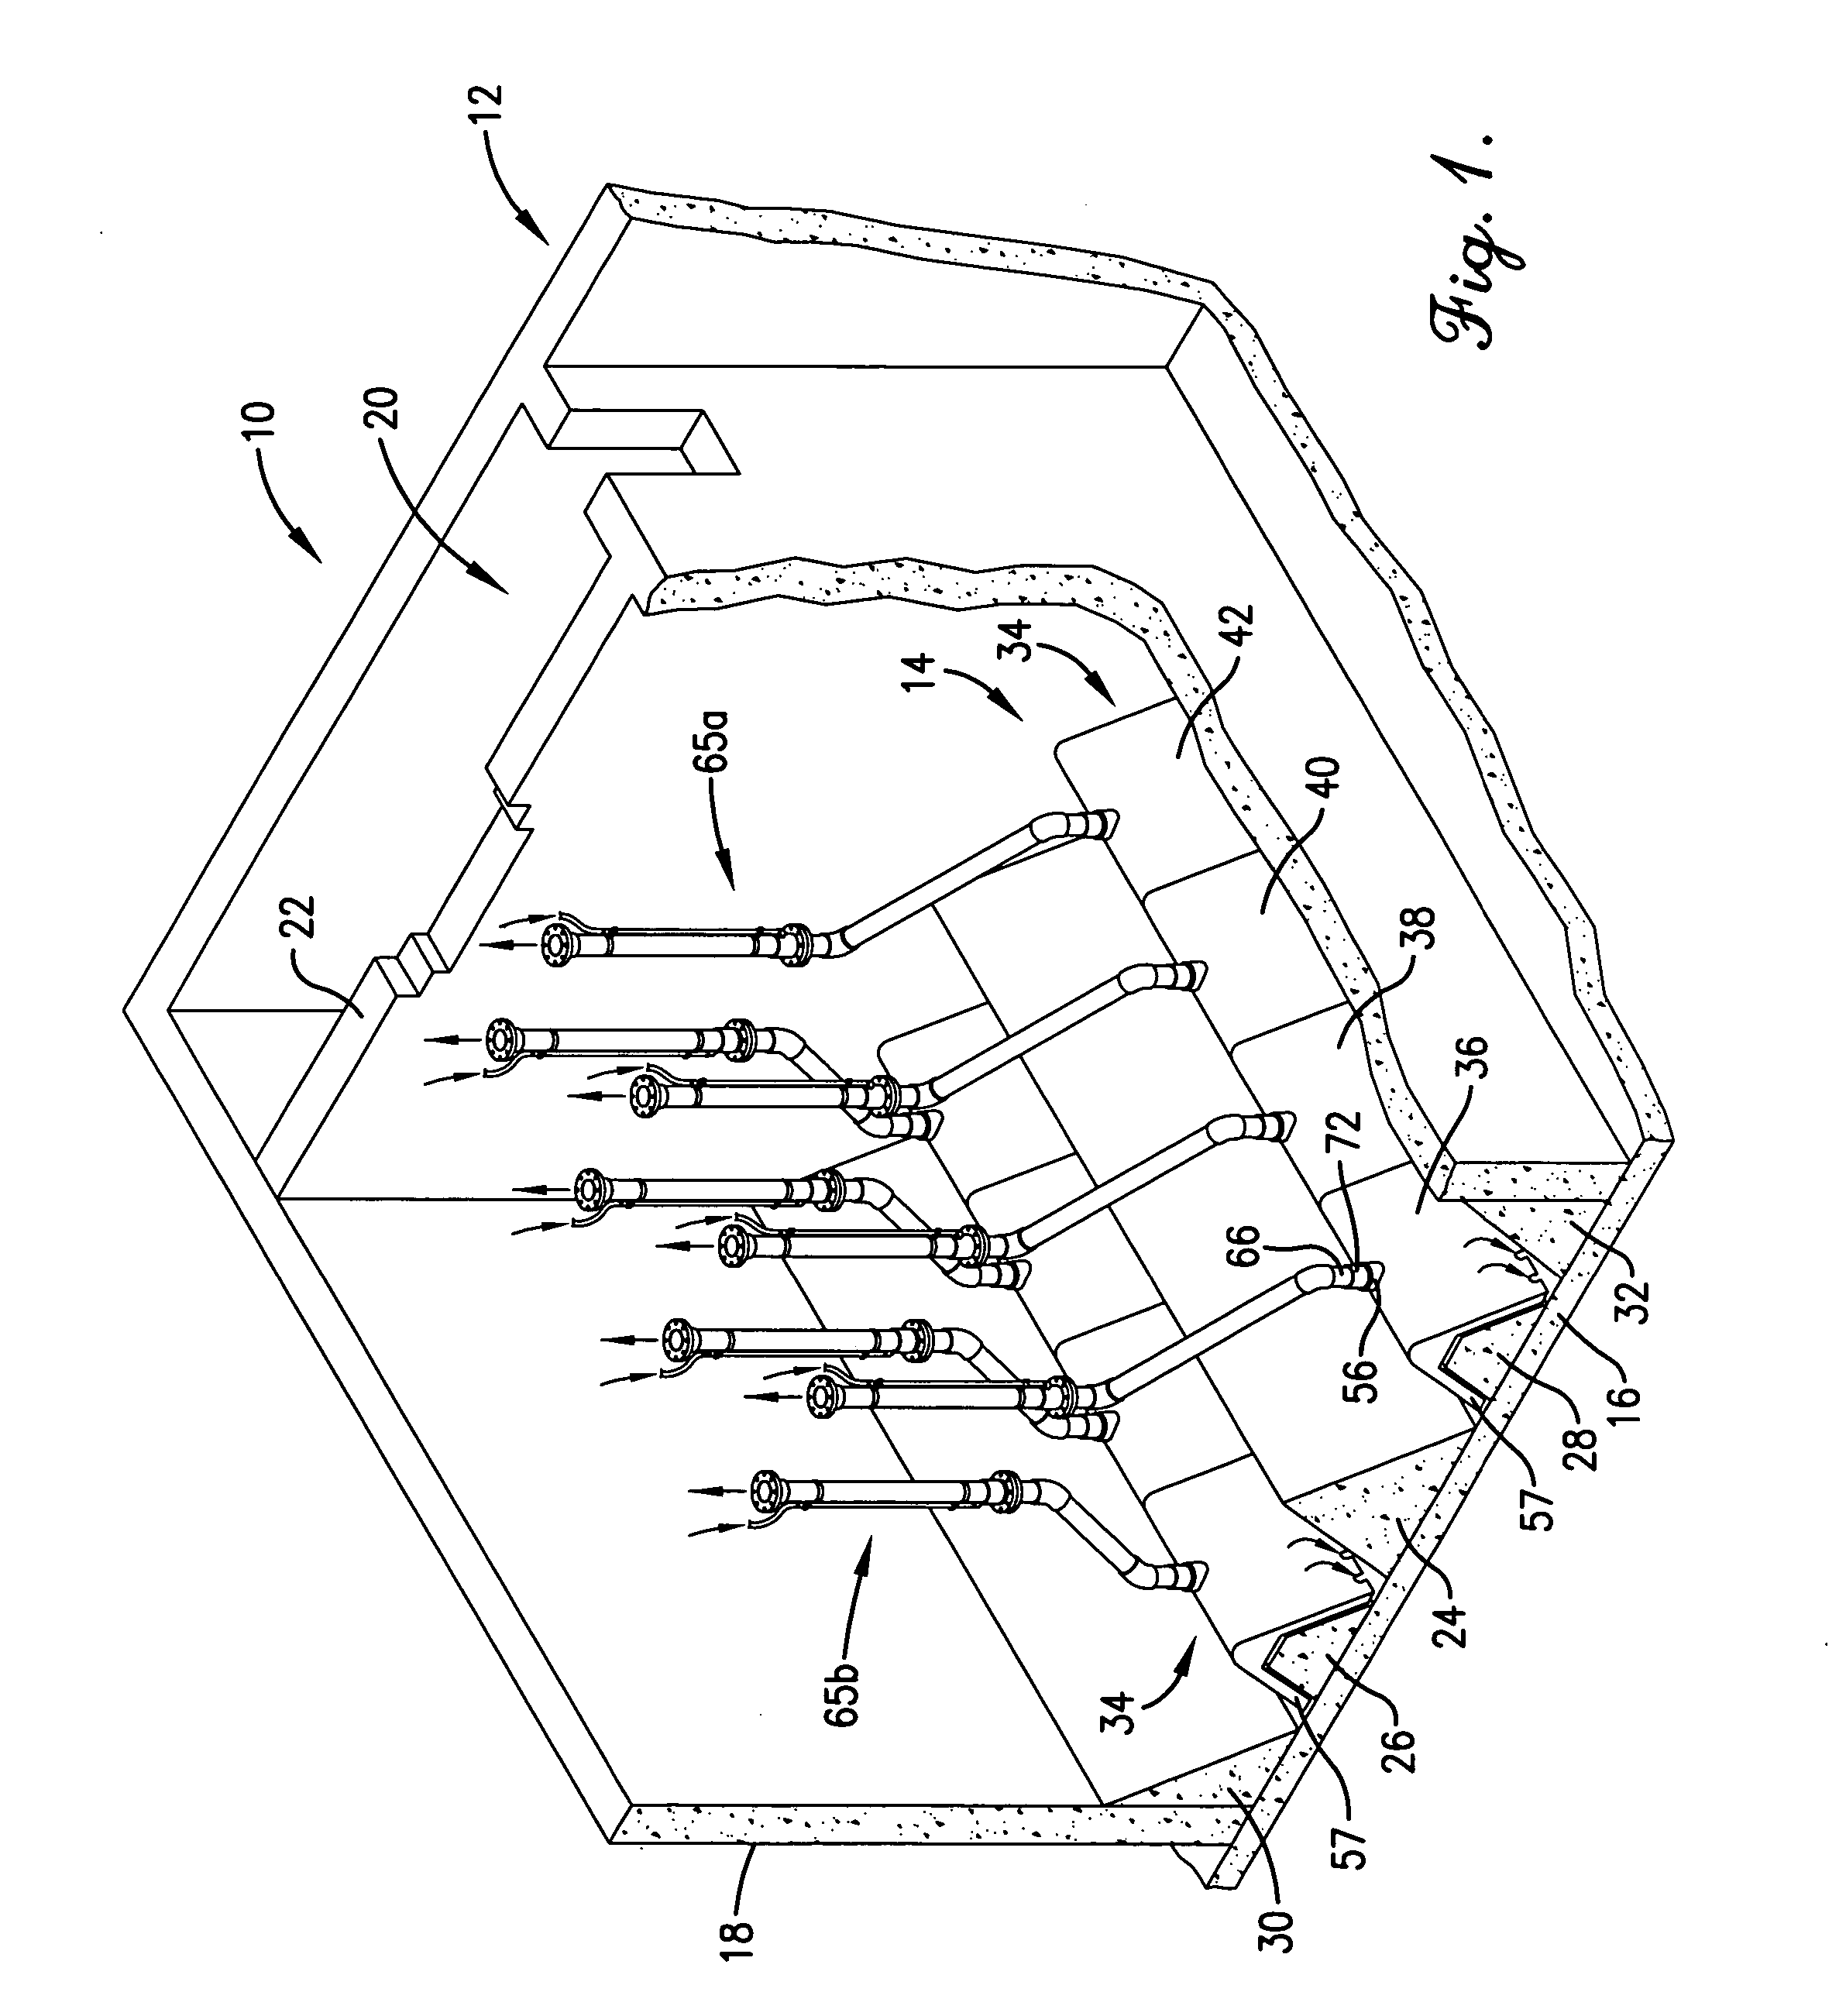 Sedimentation removal assembly for flow-through sedimentary tank